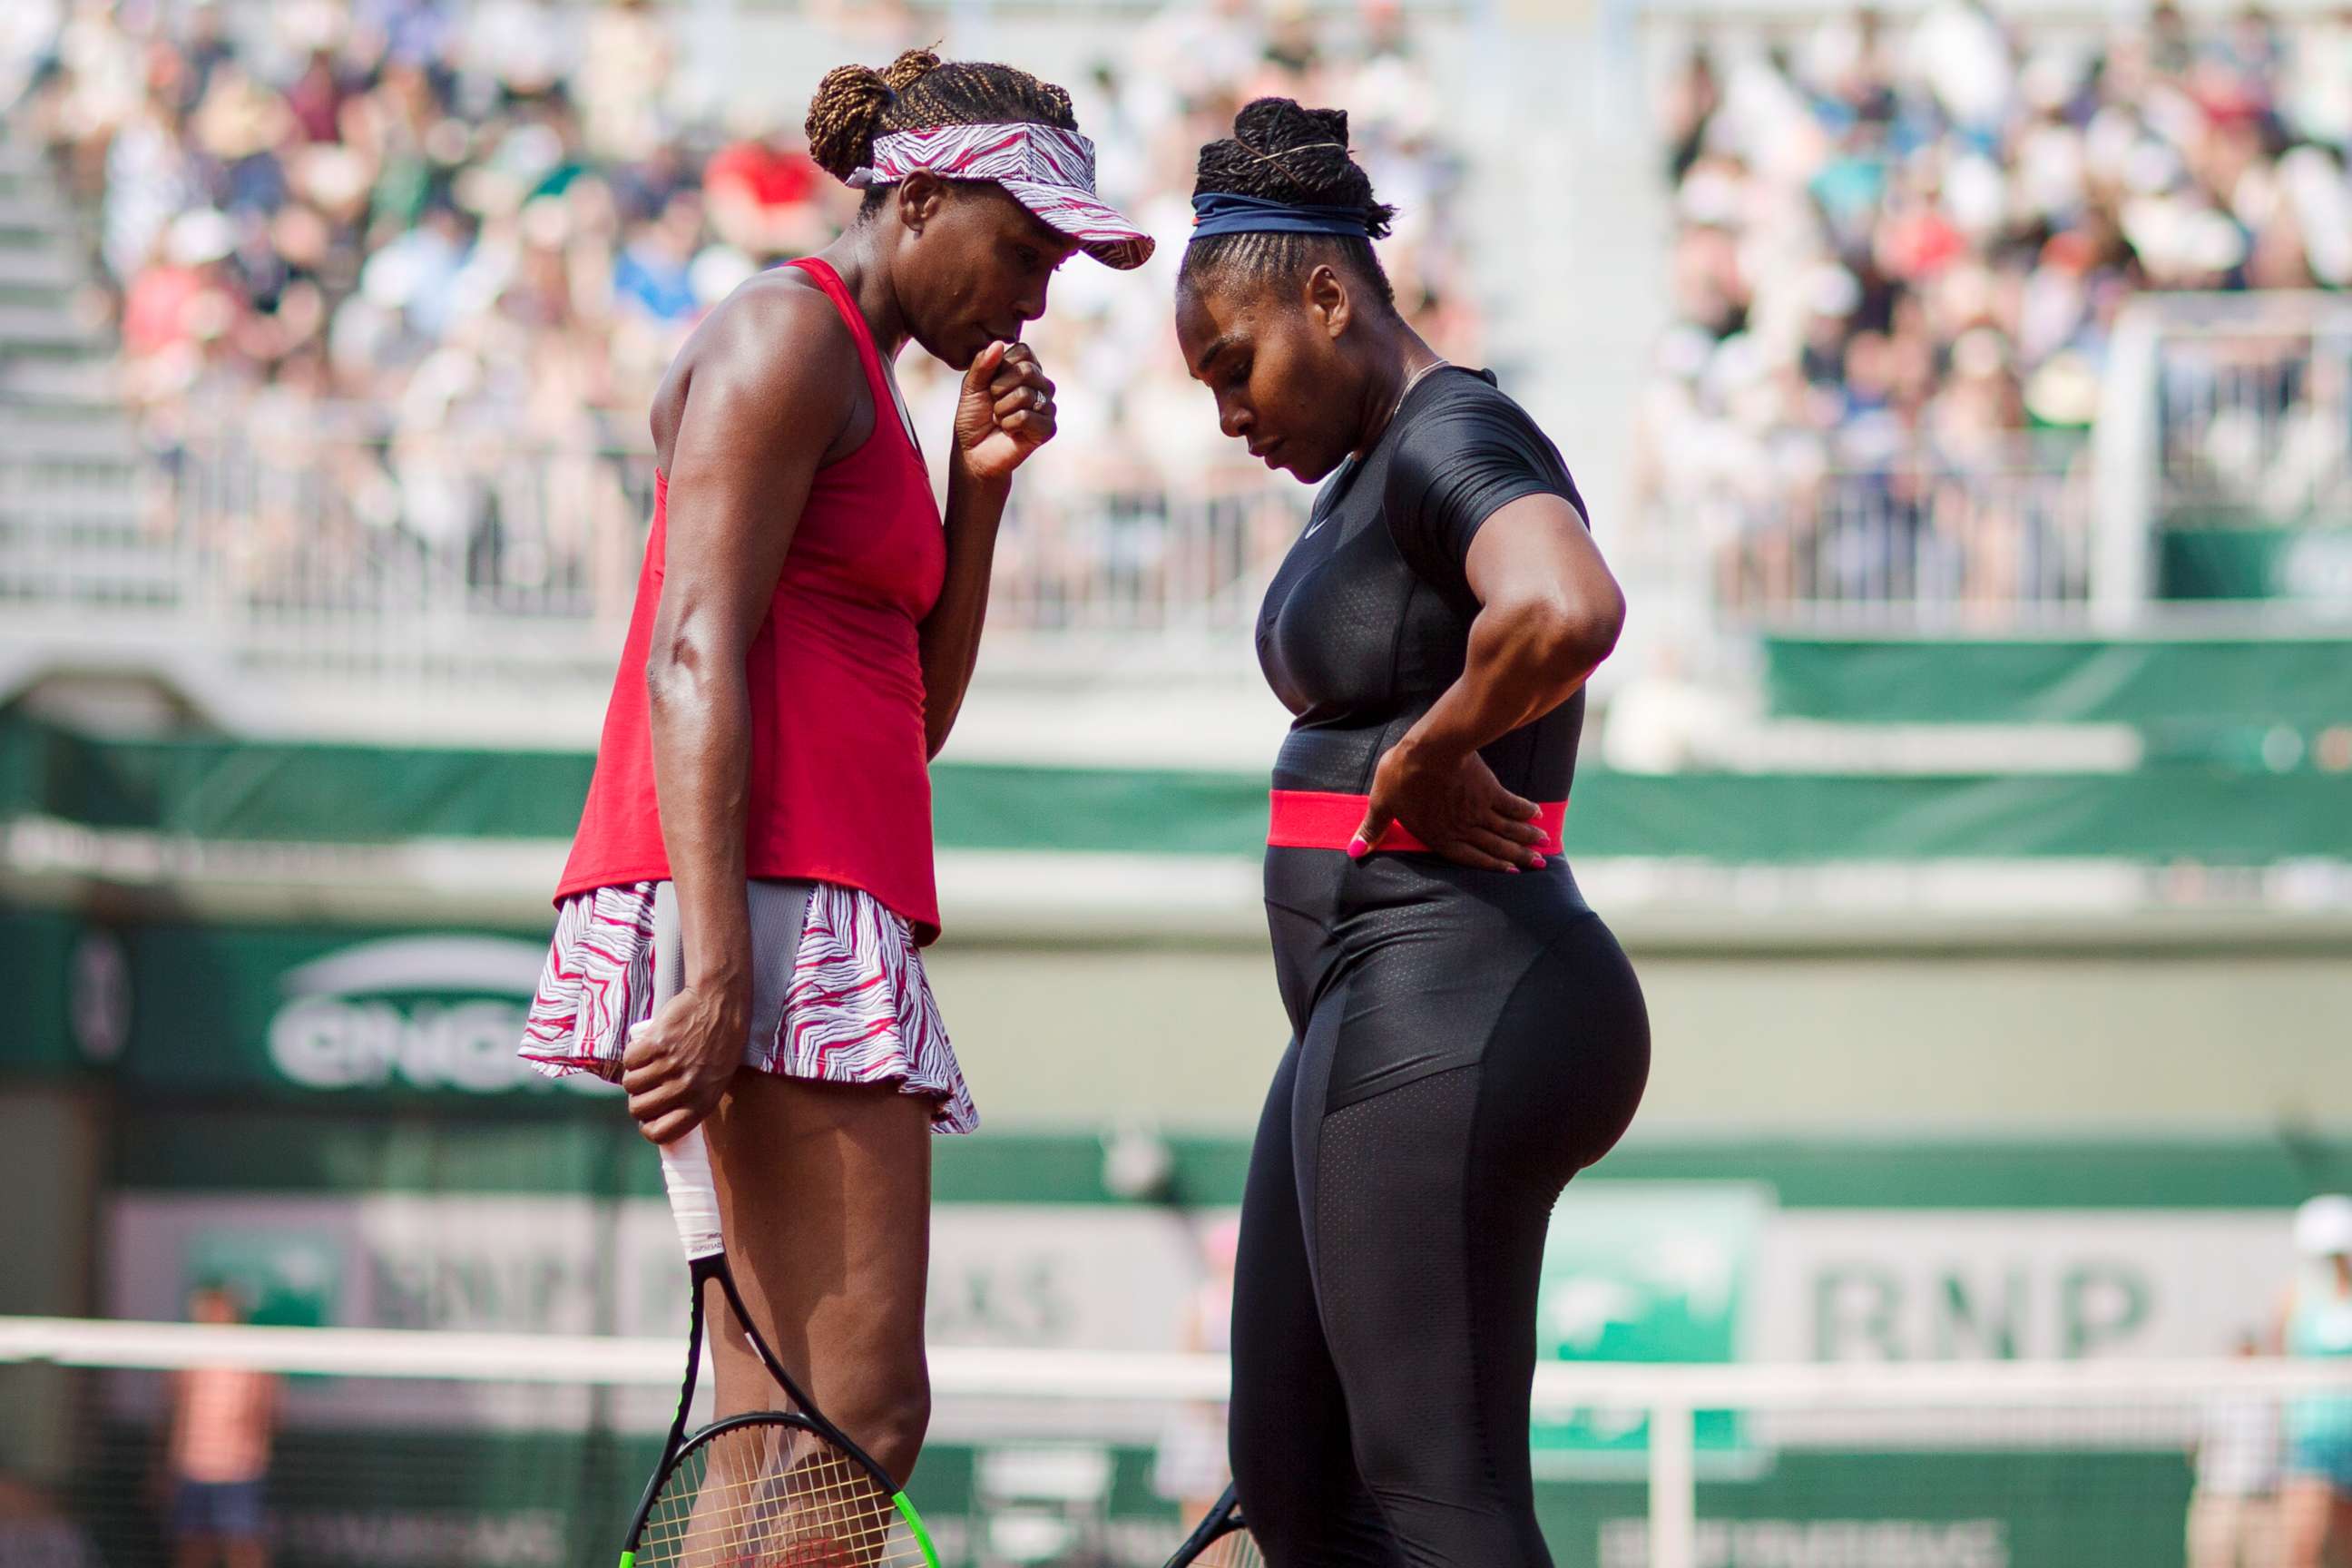 PHOTO: Serena Williams and Venus Williams talk during their match against Andreja Klepac of Slovenia and Maria Jose Martinez Sanchez of Spain in the Women's Doubles Competition at the 2018 French Open Tennis Tournament in Paris, June 3, 2018.